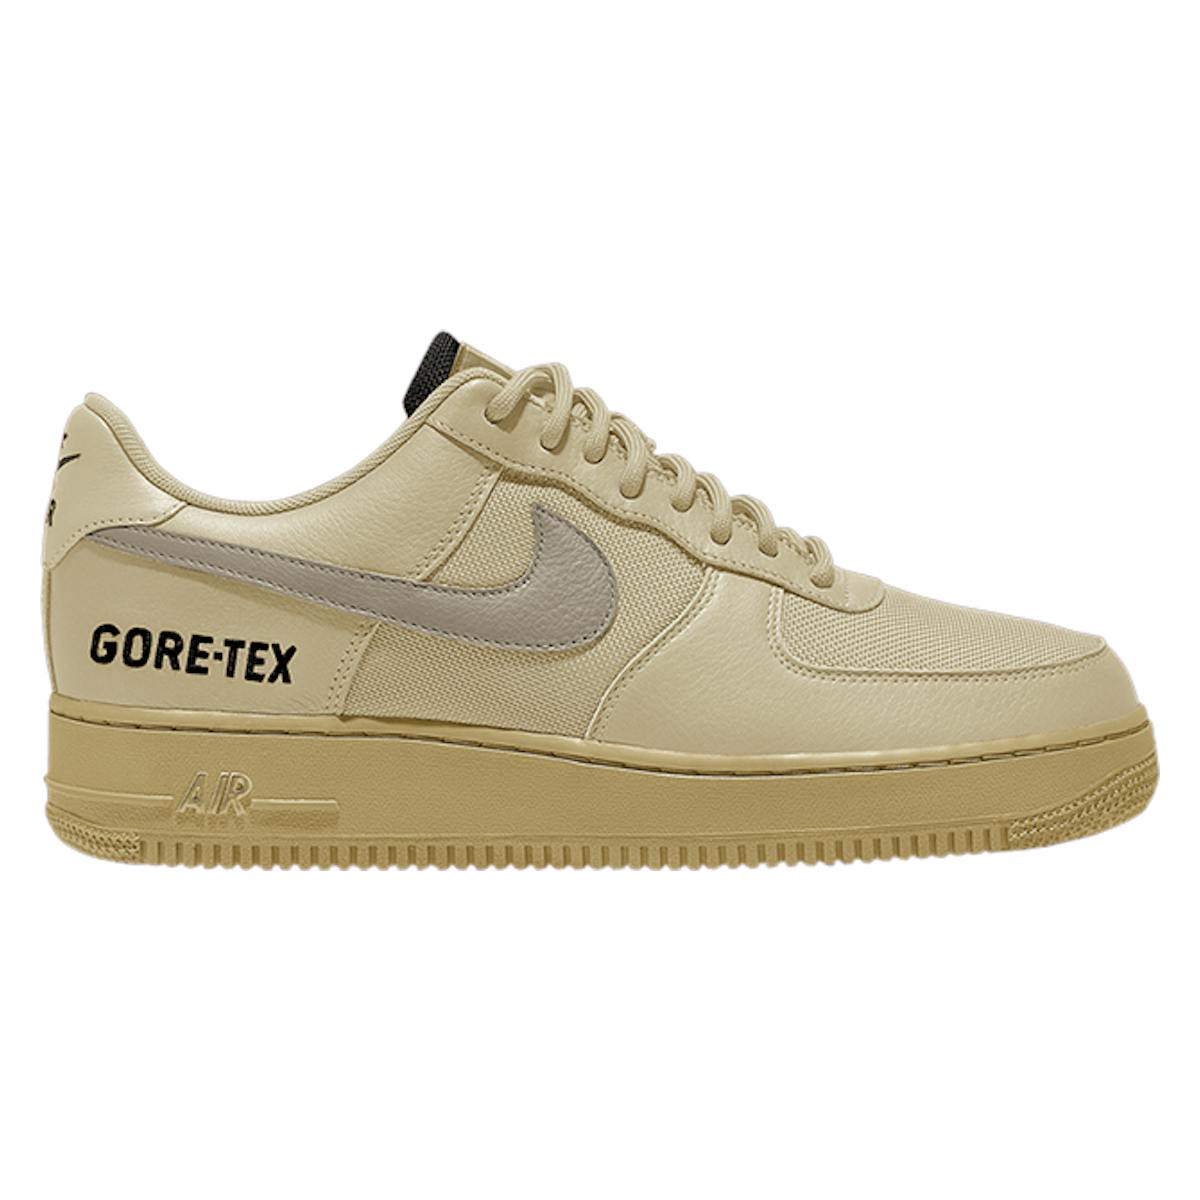 Gore-Tex x Nike Air Force 1 Low "Gold"